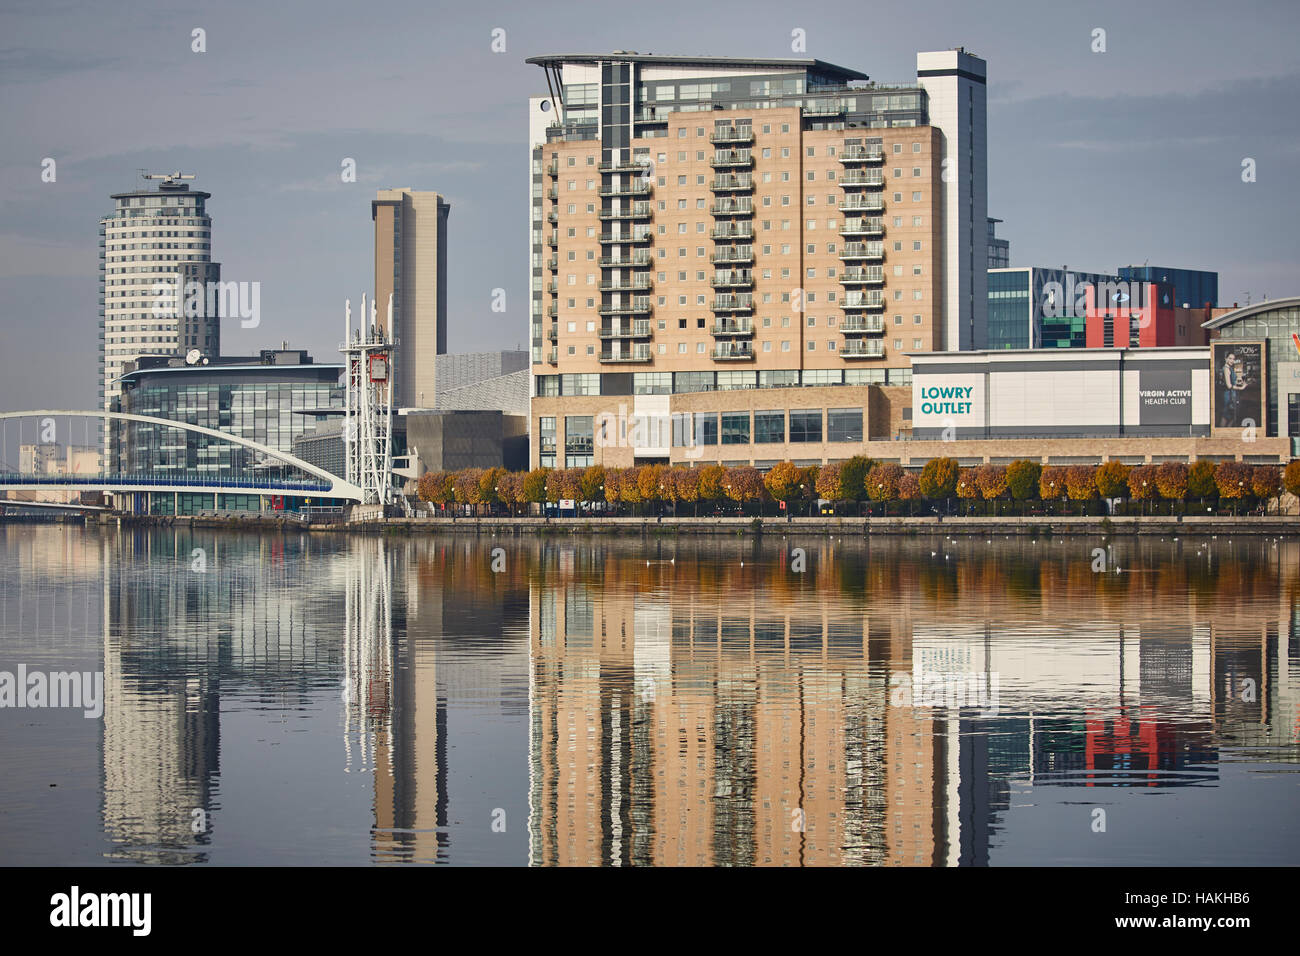 Manchester Salford Quays landscape   Industrial revolution dock salford quays Ship Canal Lowry outlet Mediacity urban scape water front reflection reg Stock Photo